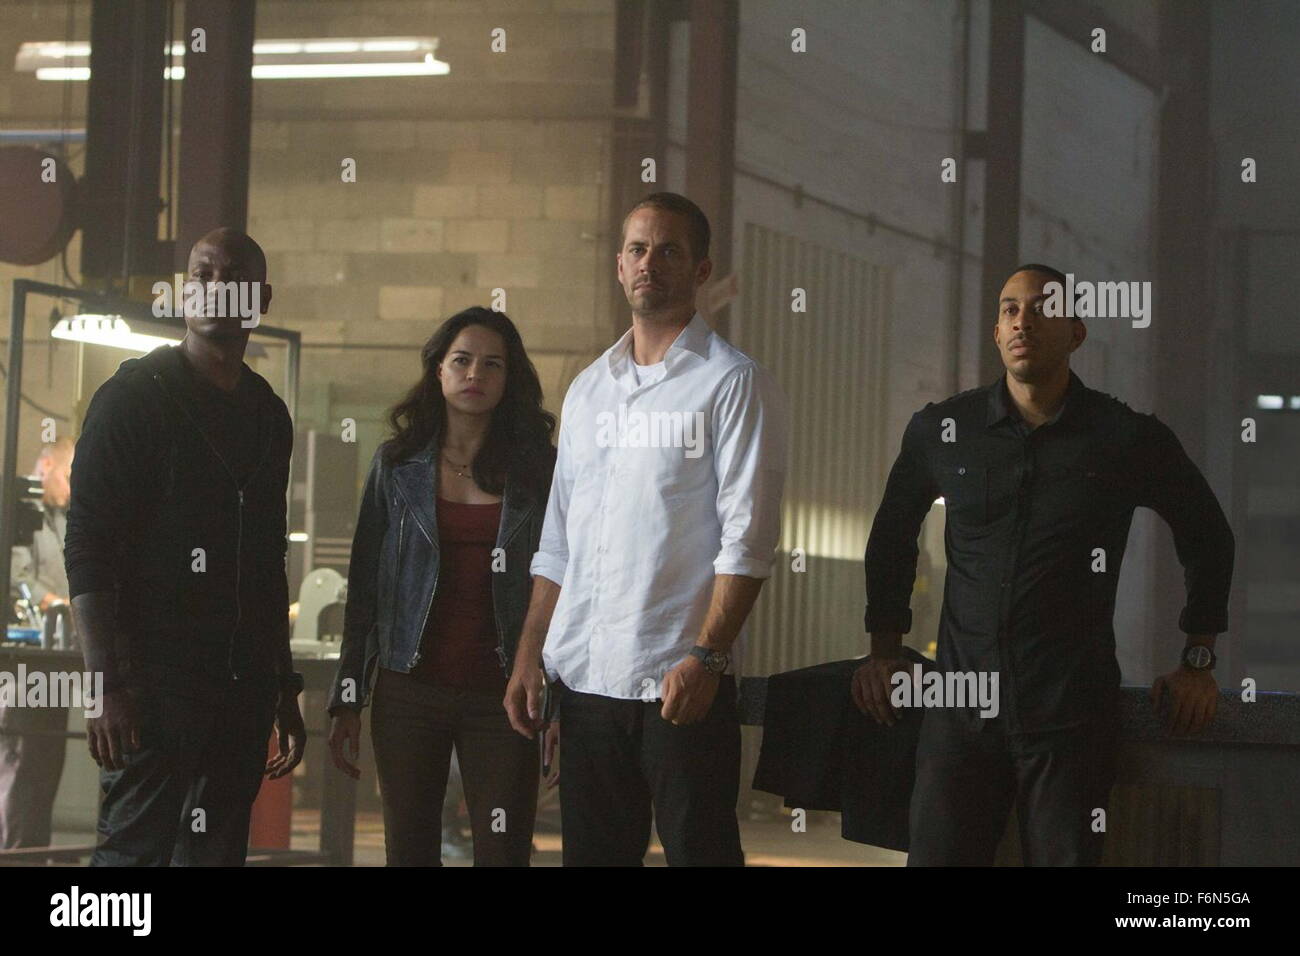 RELEASE DATE: April 3, 2015 TITLE: Furious 7 STUDIO: Universal Picures DIRECTOR: James Wan PLOT: Deckard Shaw seeks revenge against Dominic Toretto and his family for the death of his brother PICTURED: TYRESE GIBSON as Roman Pearce, MICHELLE RODRIGUEZ as Letty Ortiz, PAUL WALKER as Brian O'Conner and LUDACRIS as Tej Parker (Credit: c Universal Picures/Entertainment Pictures) Stock Photo